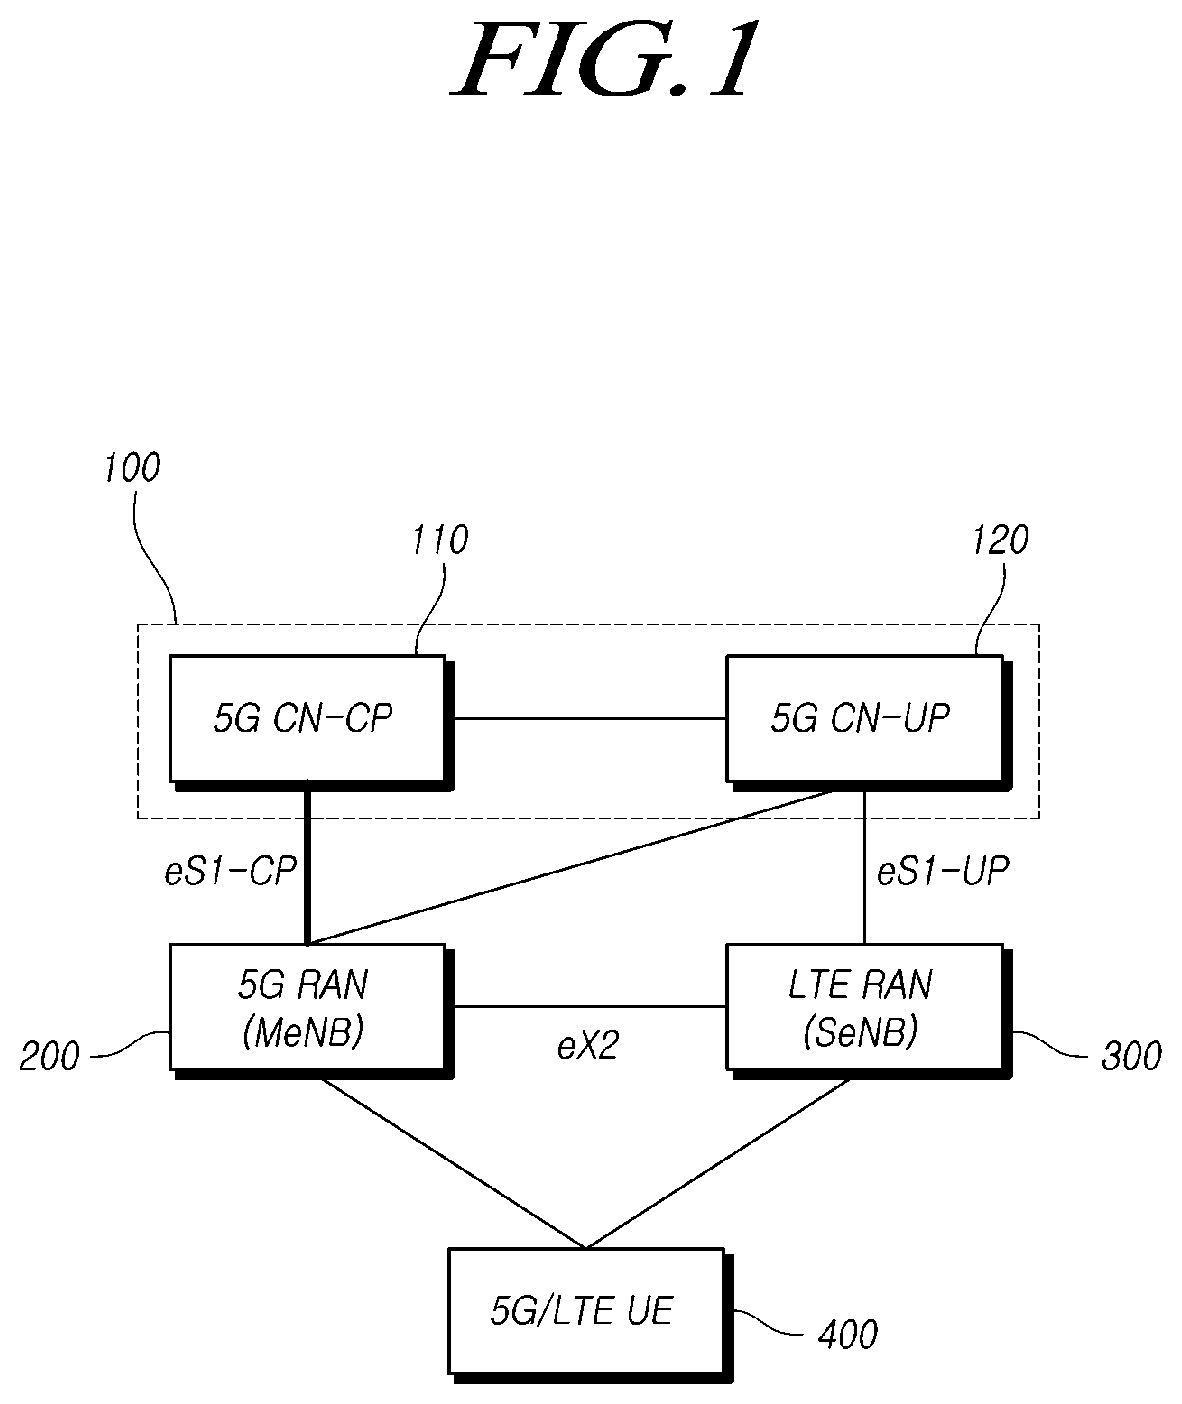 Method for interworking between heterogeneous radio access networks and apparatus therefor